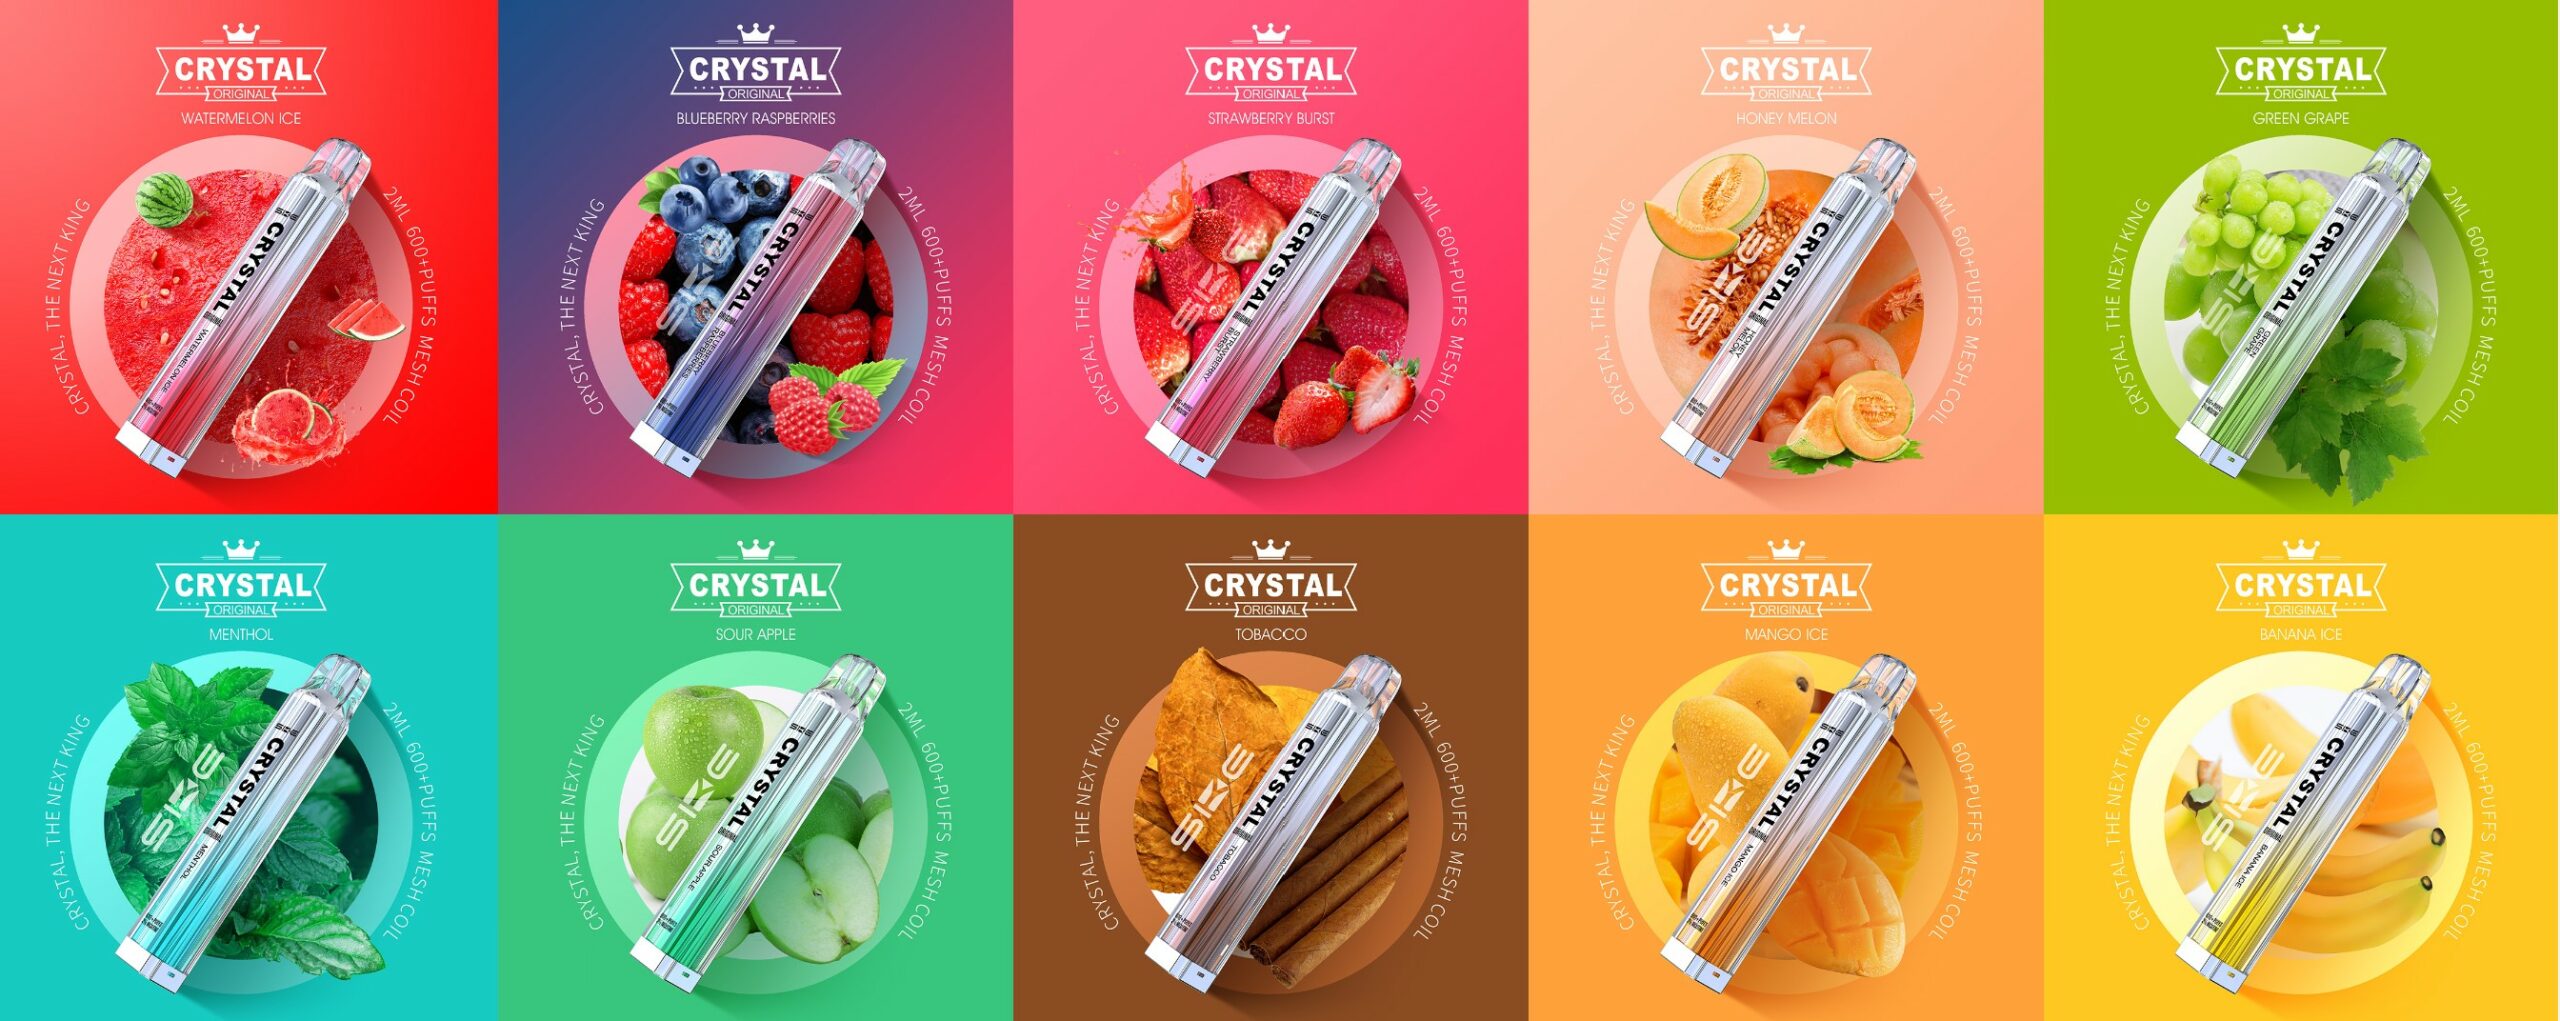 crystal disposable vape mix images